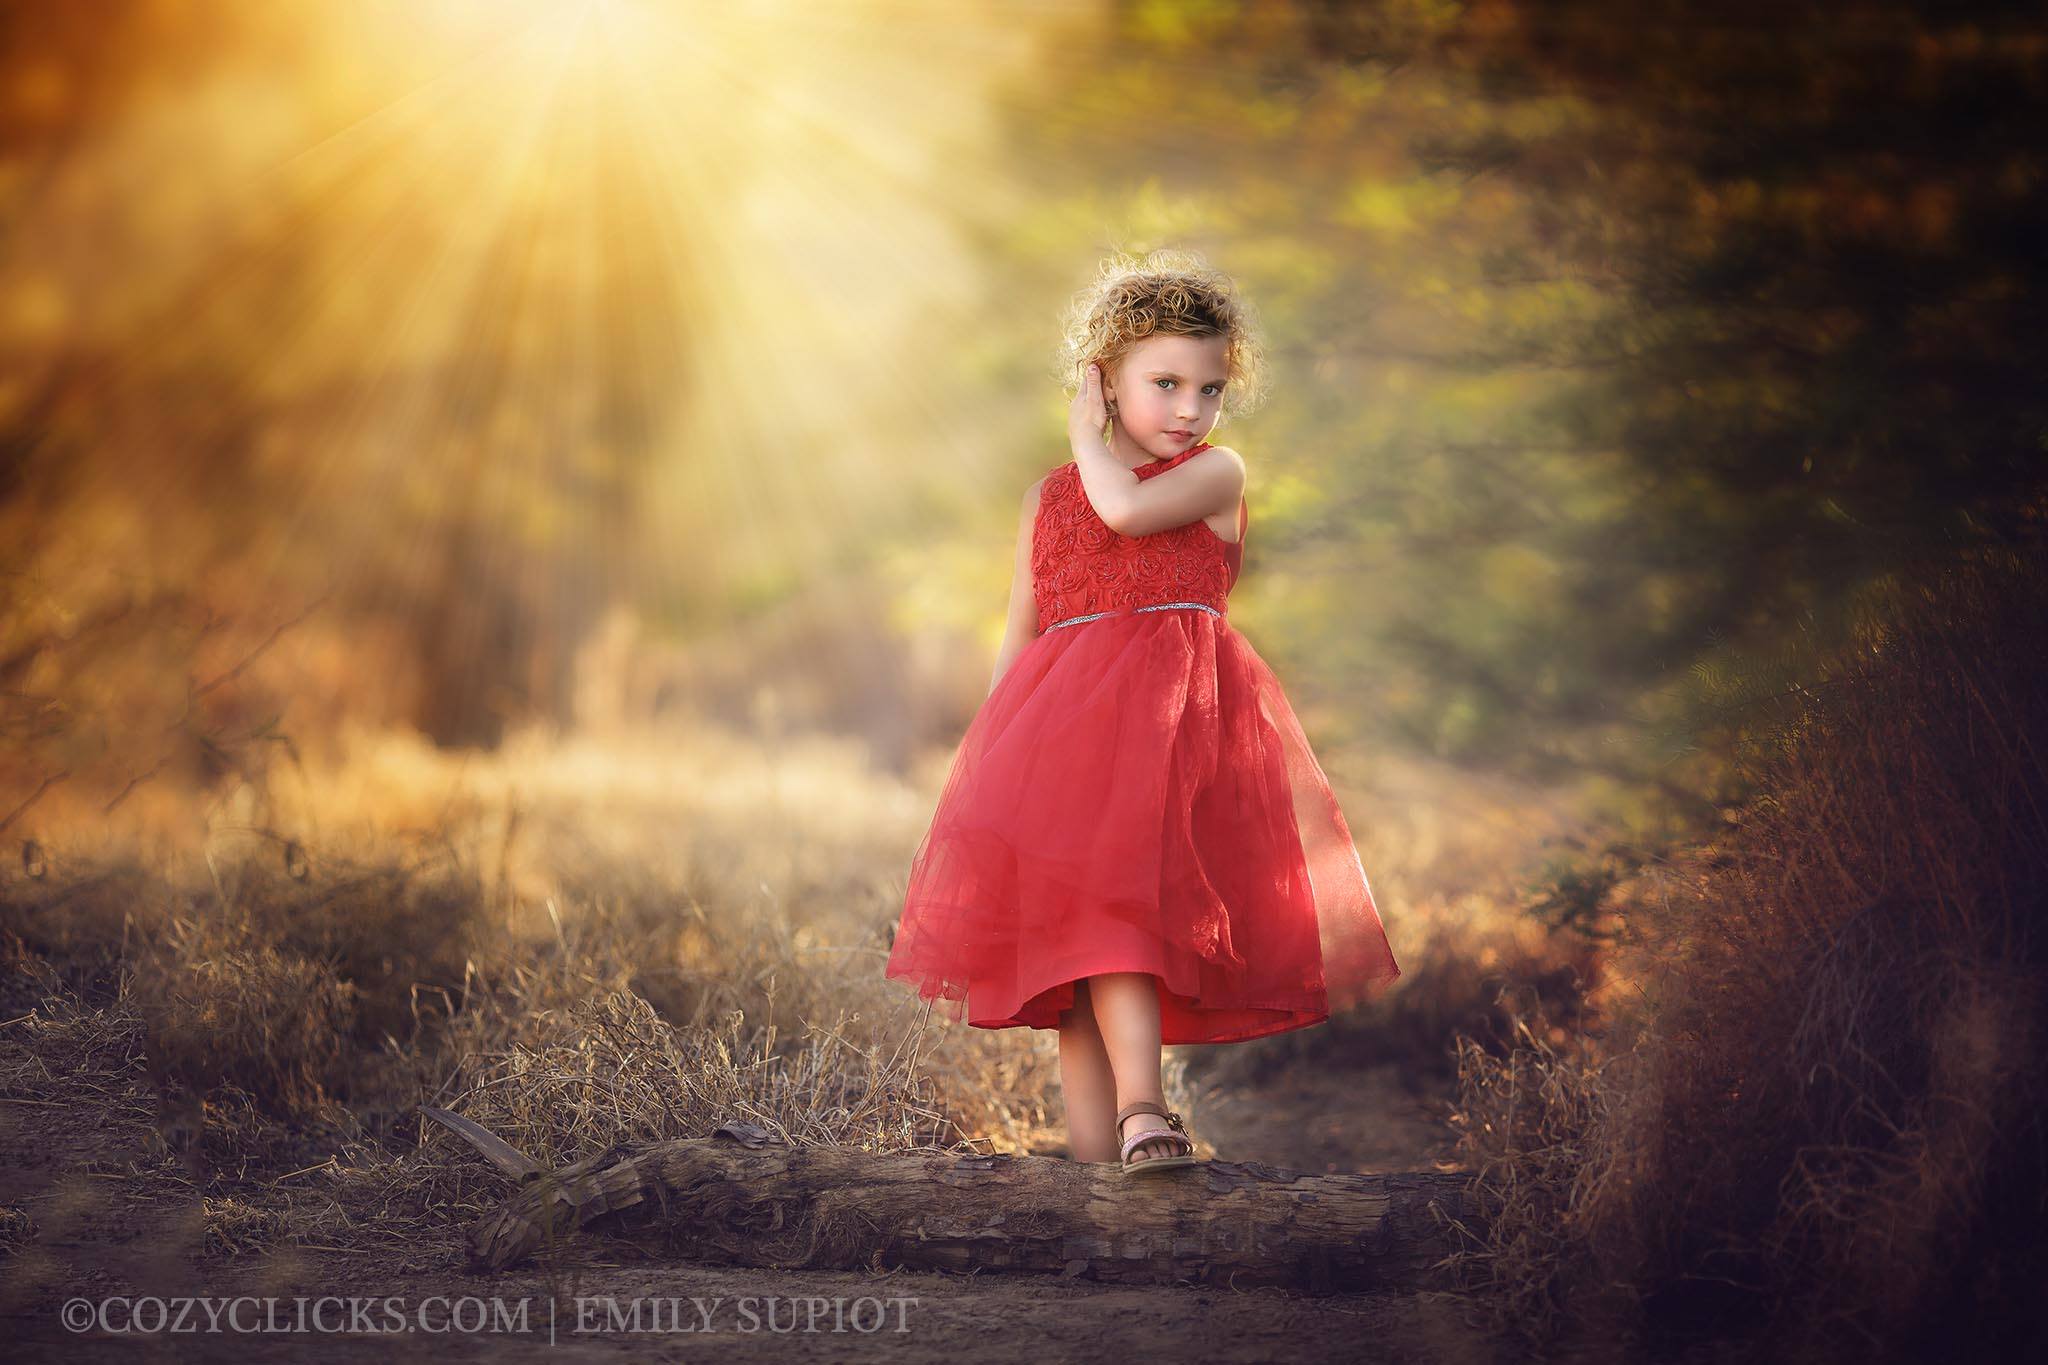 How to easily add in sun rays in Photoshop